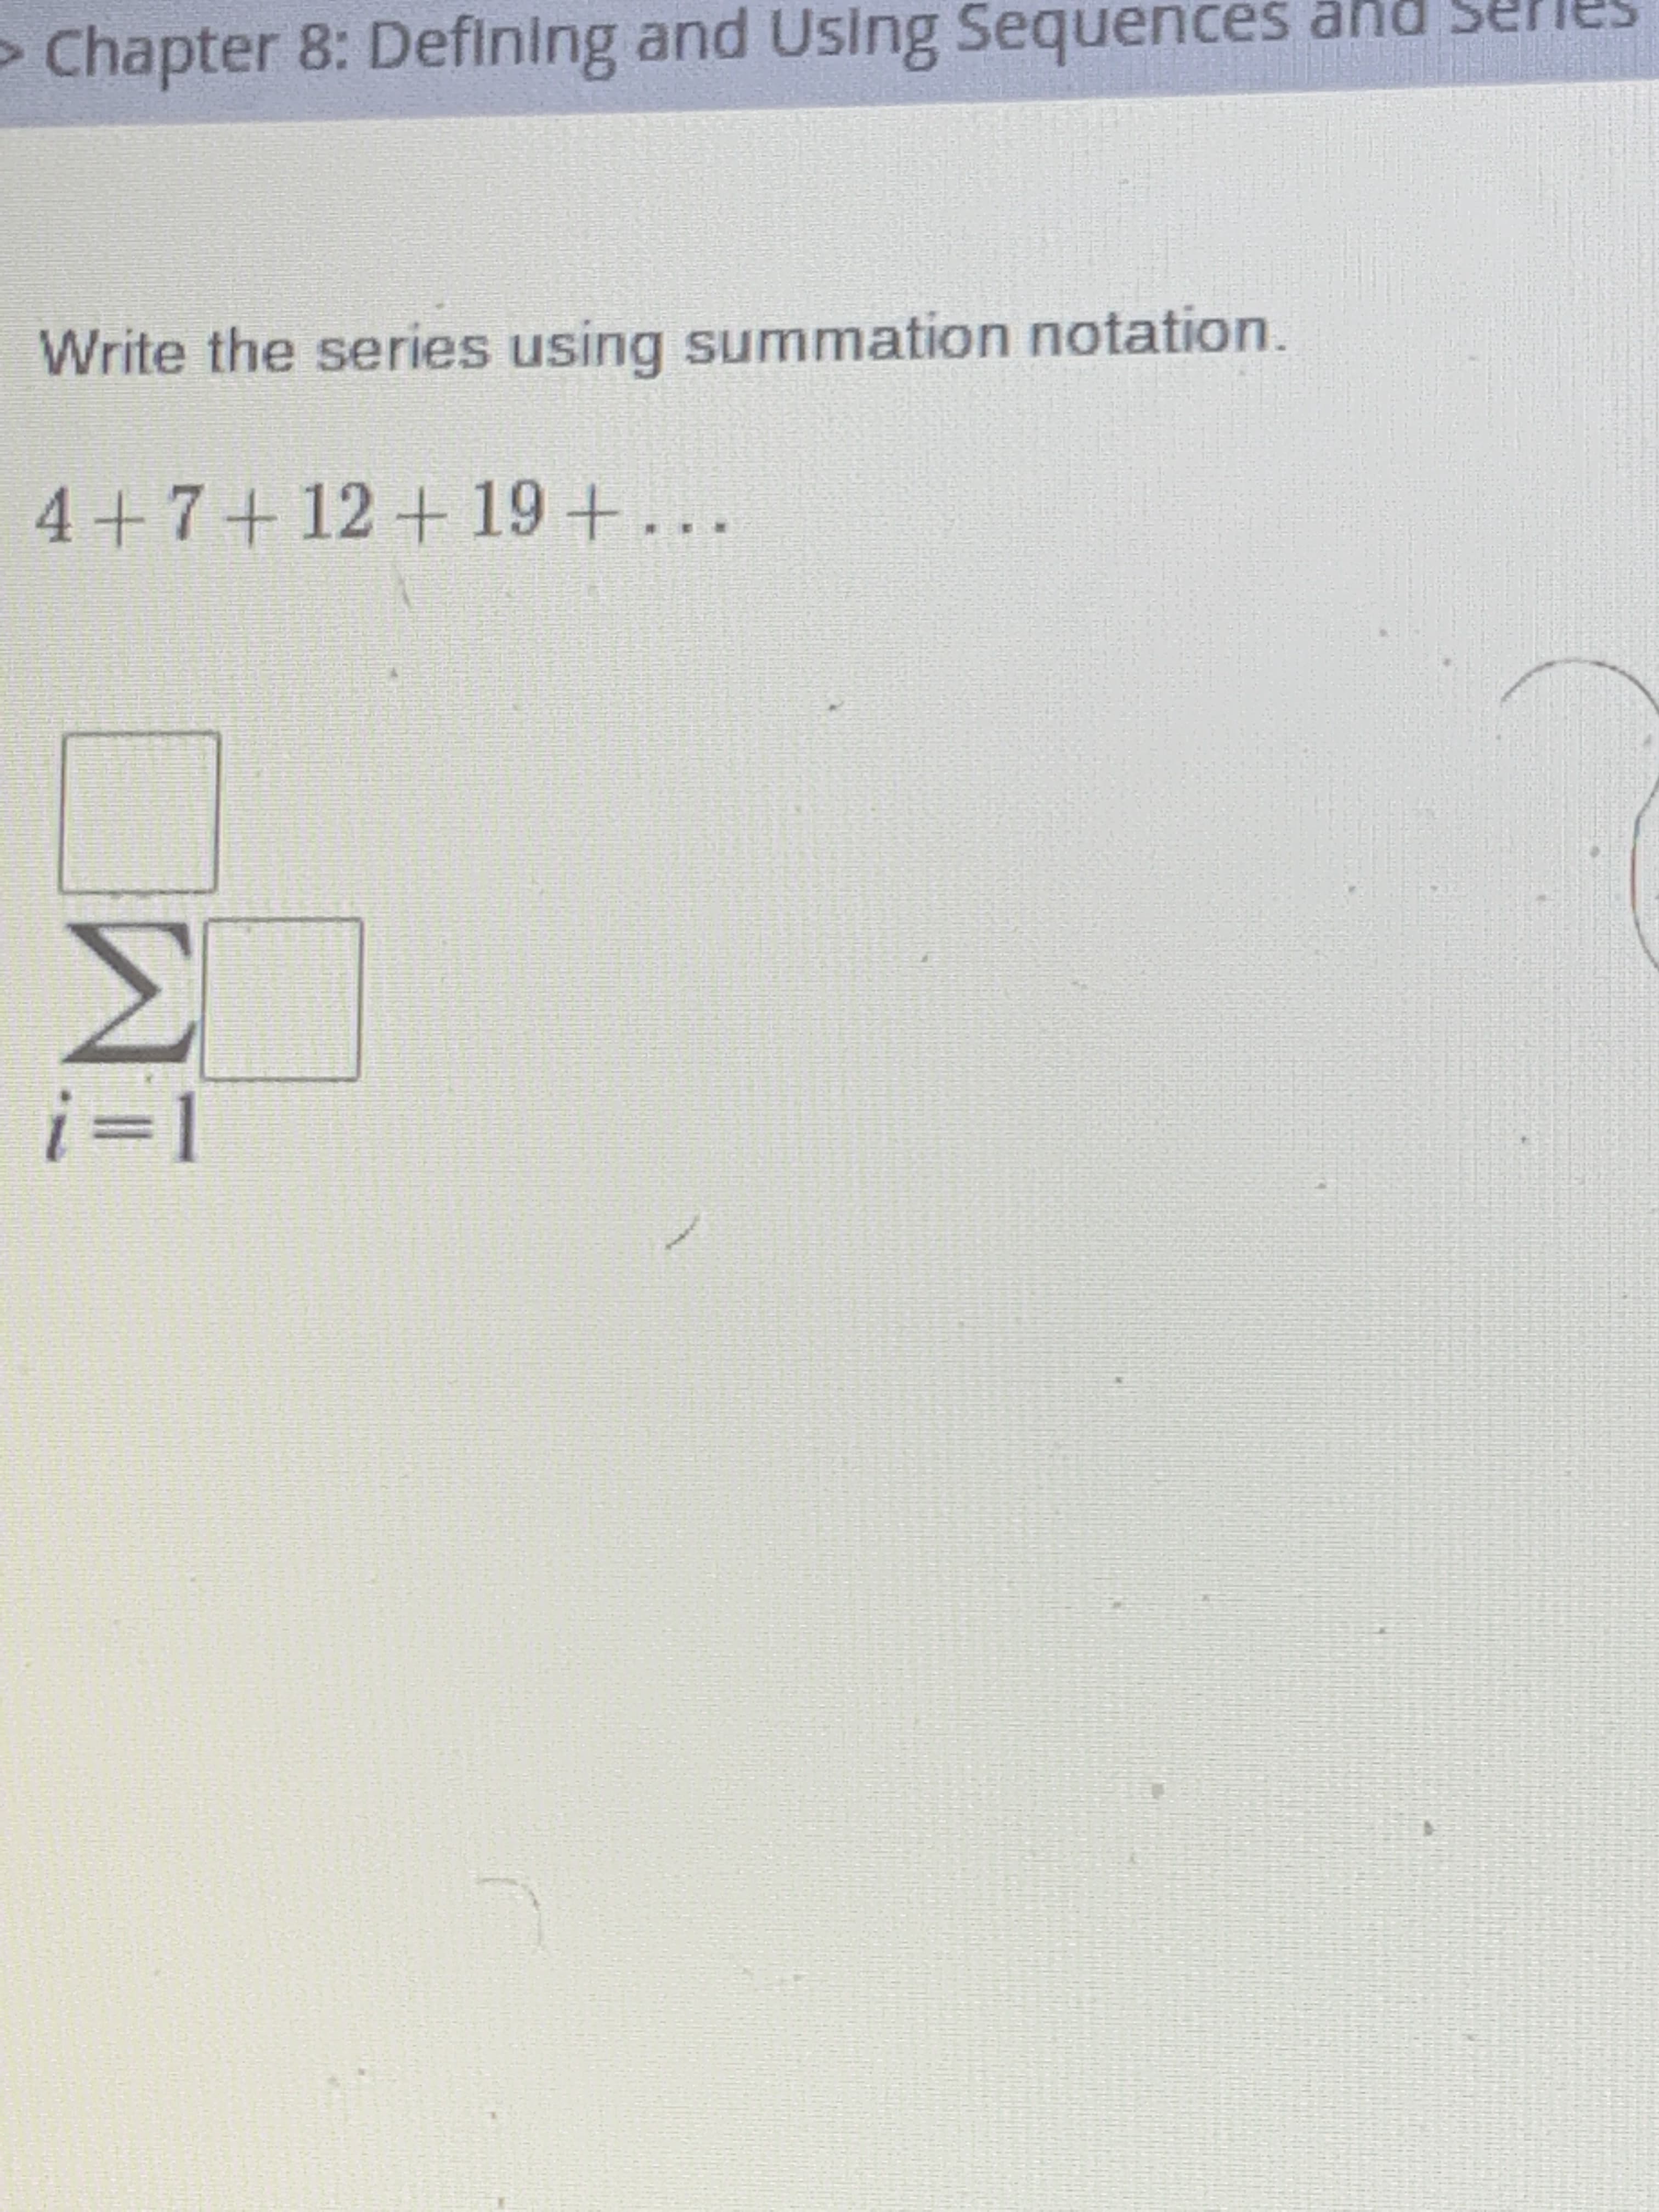 Write the series using summation notation.
4+7+12+19+...
